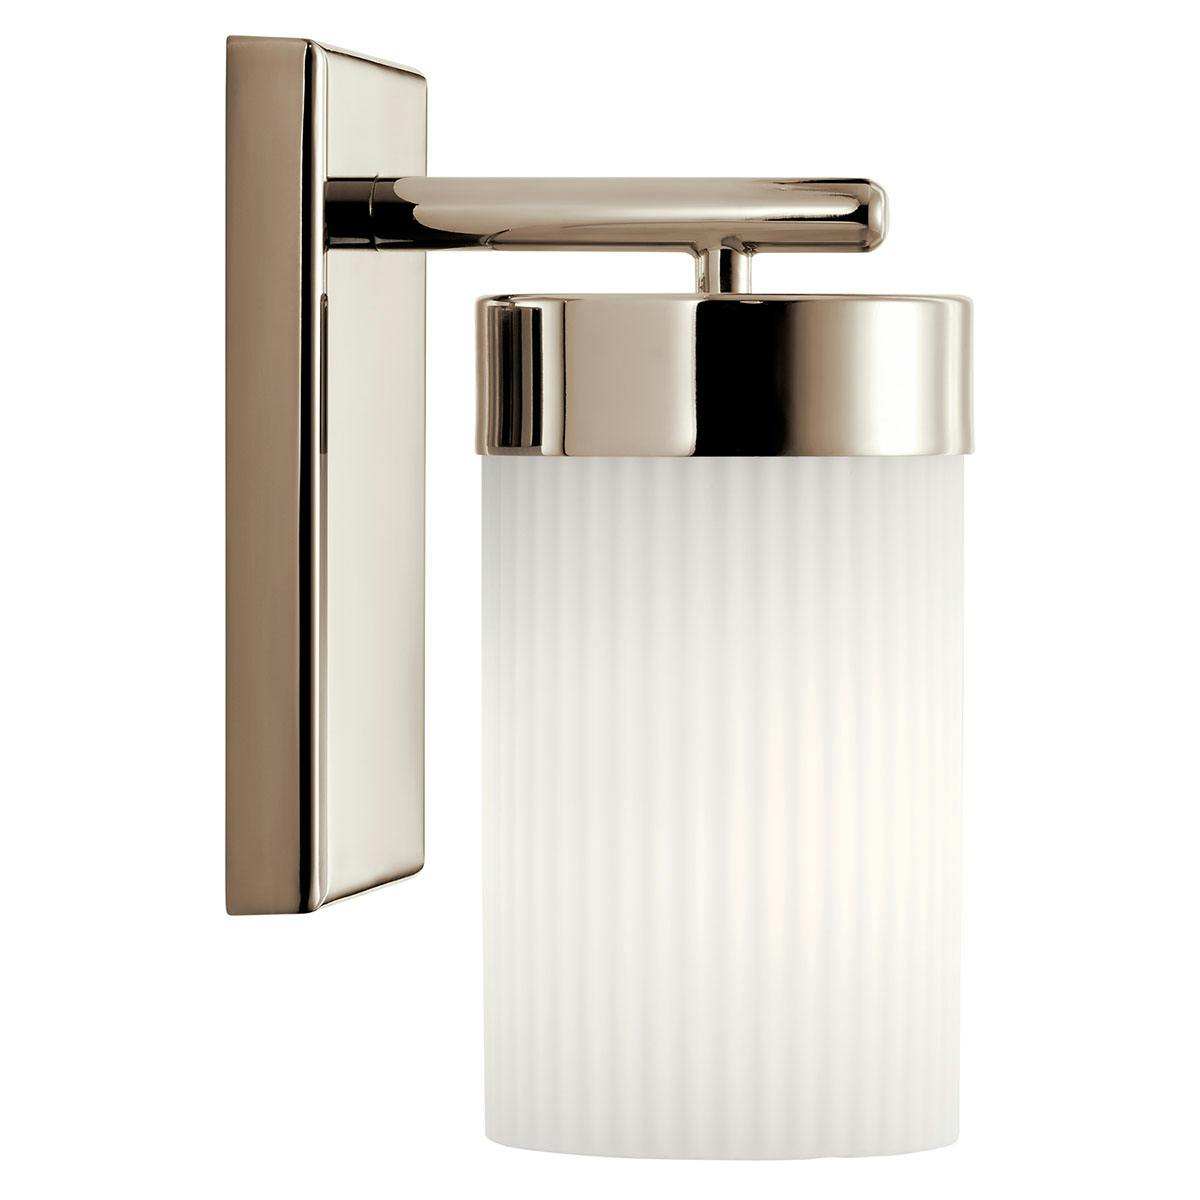 Profile view of the Ciona 9" 1 Light Sconce in Nickel on a white background